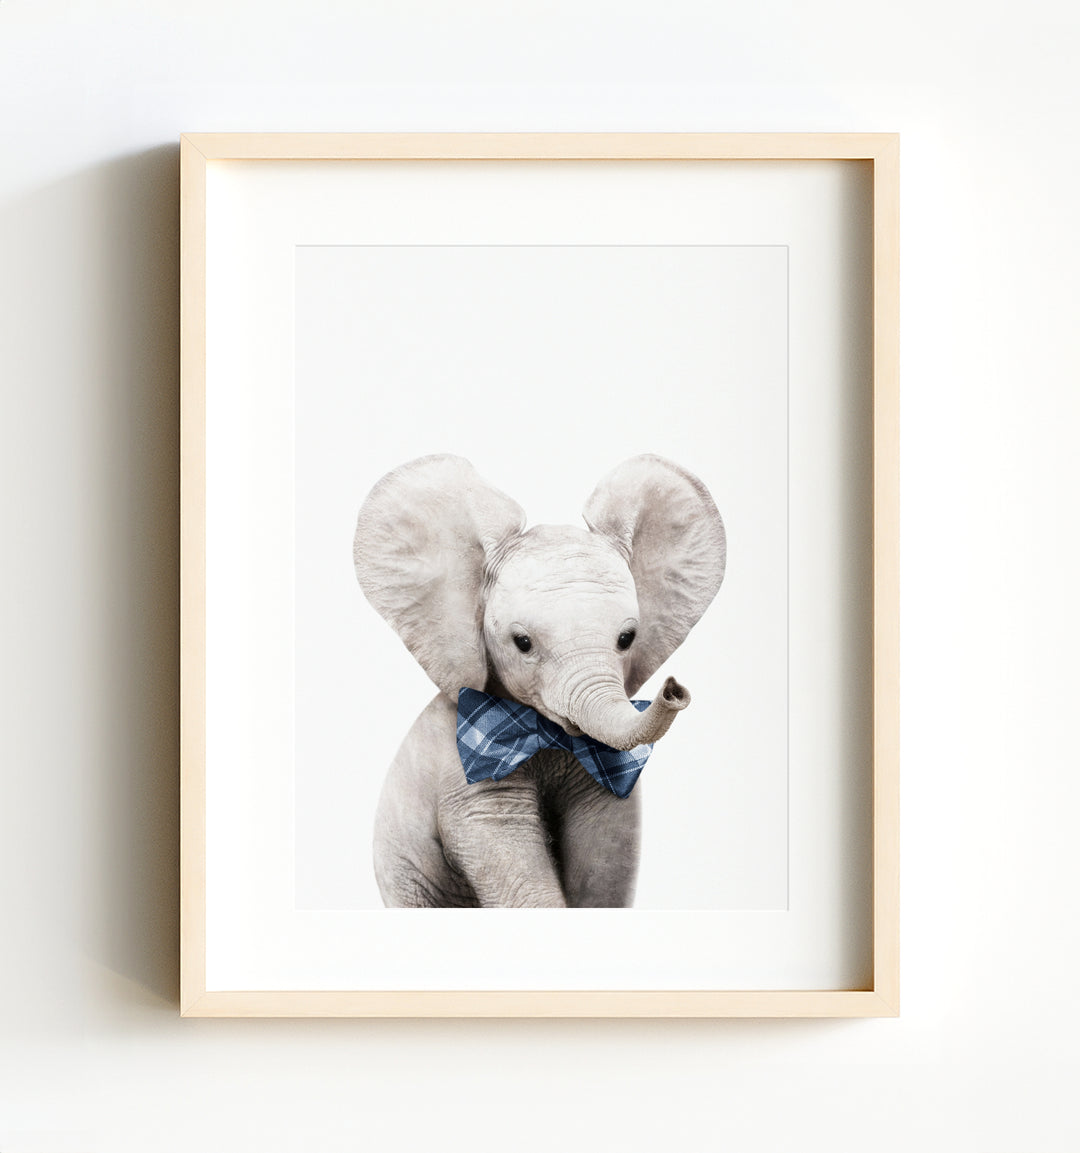 Baby Elephant - The Crown Prints